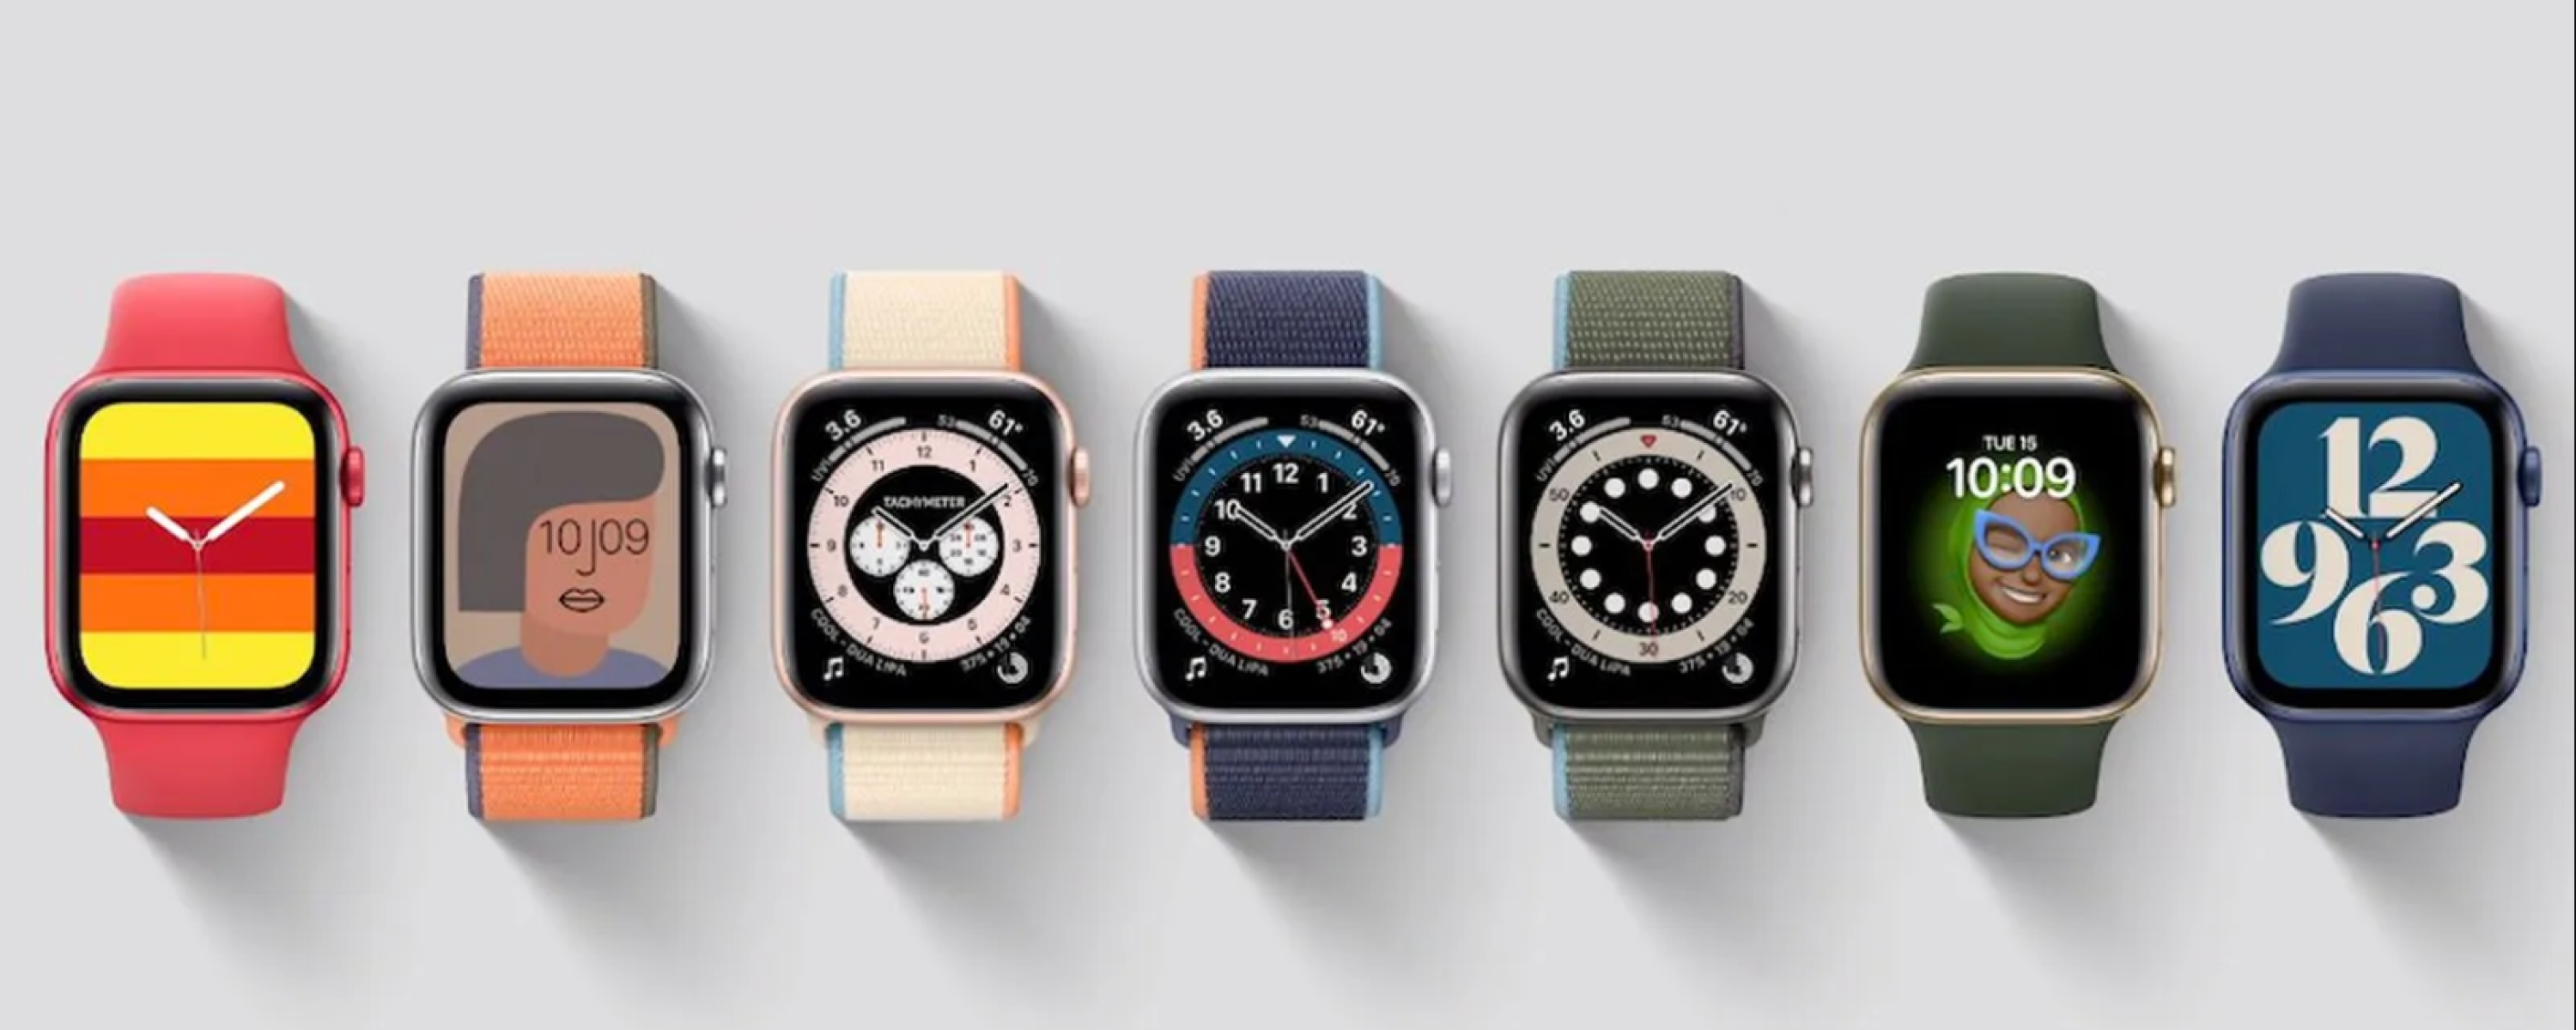 21 Best Apple Watch Faces in 2022 (+ New watchOS 9 Faces)